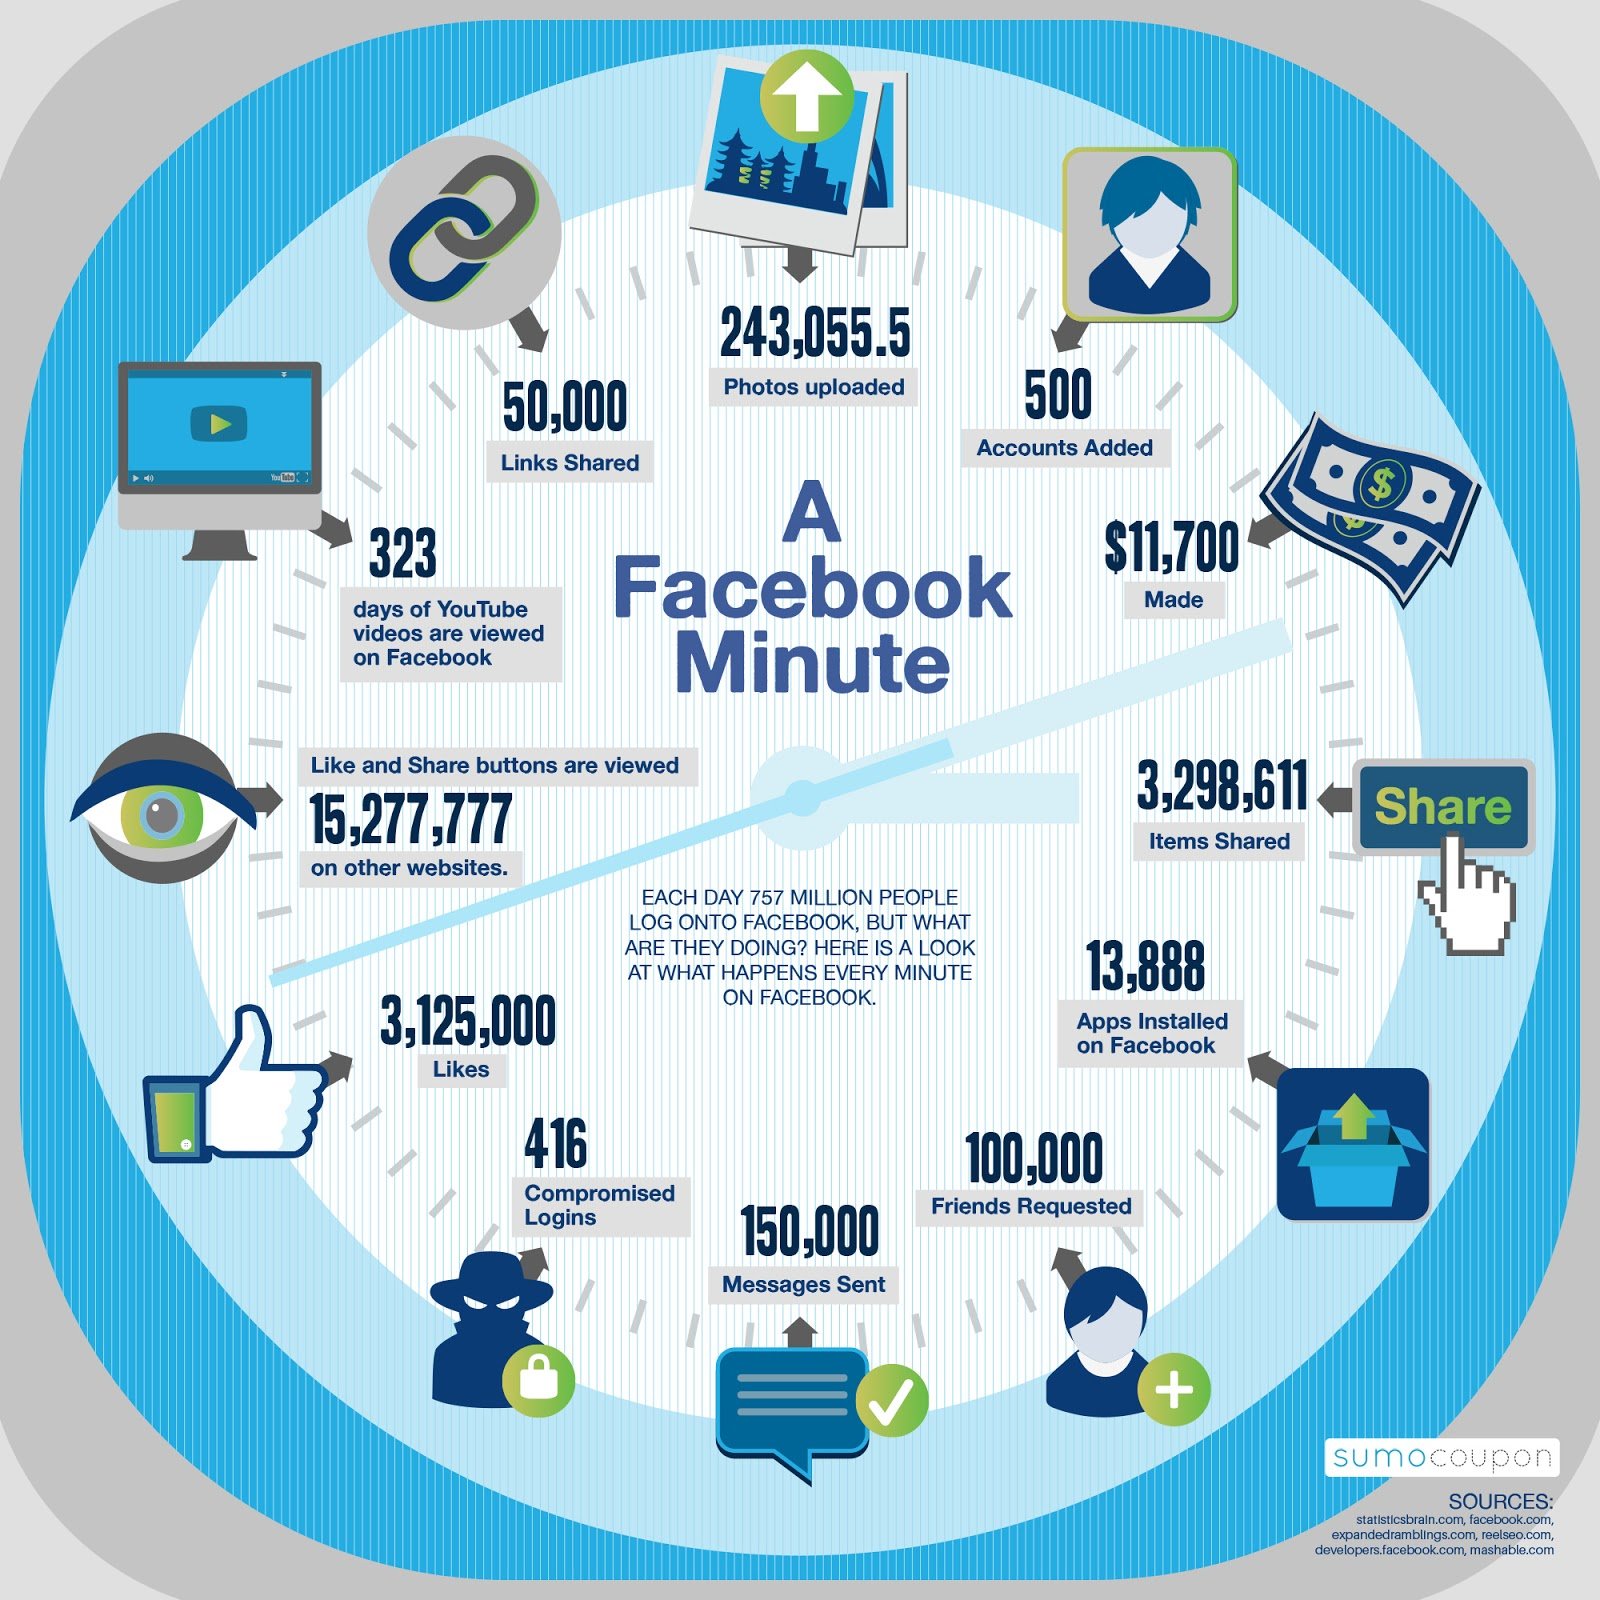 What happens on Facebook in a minute